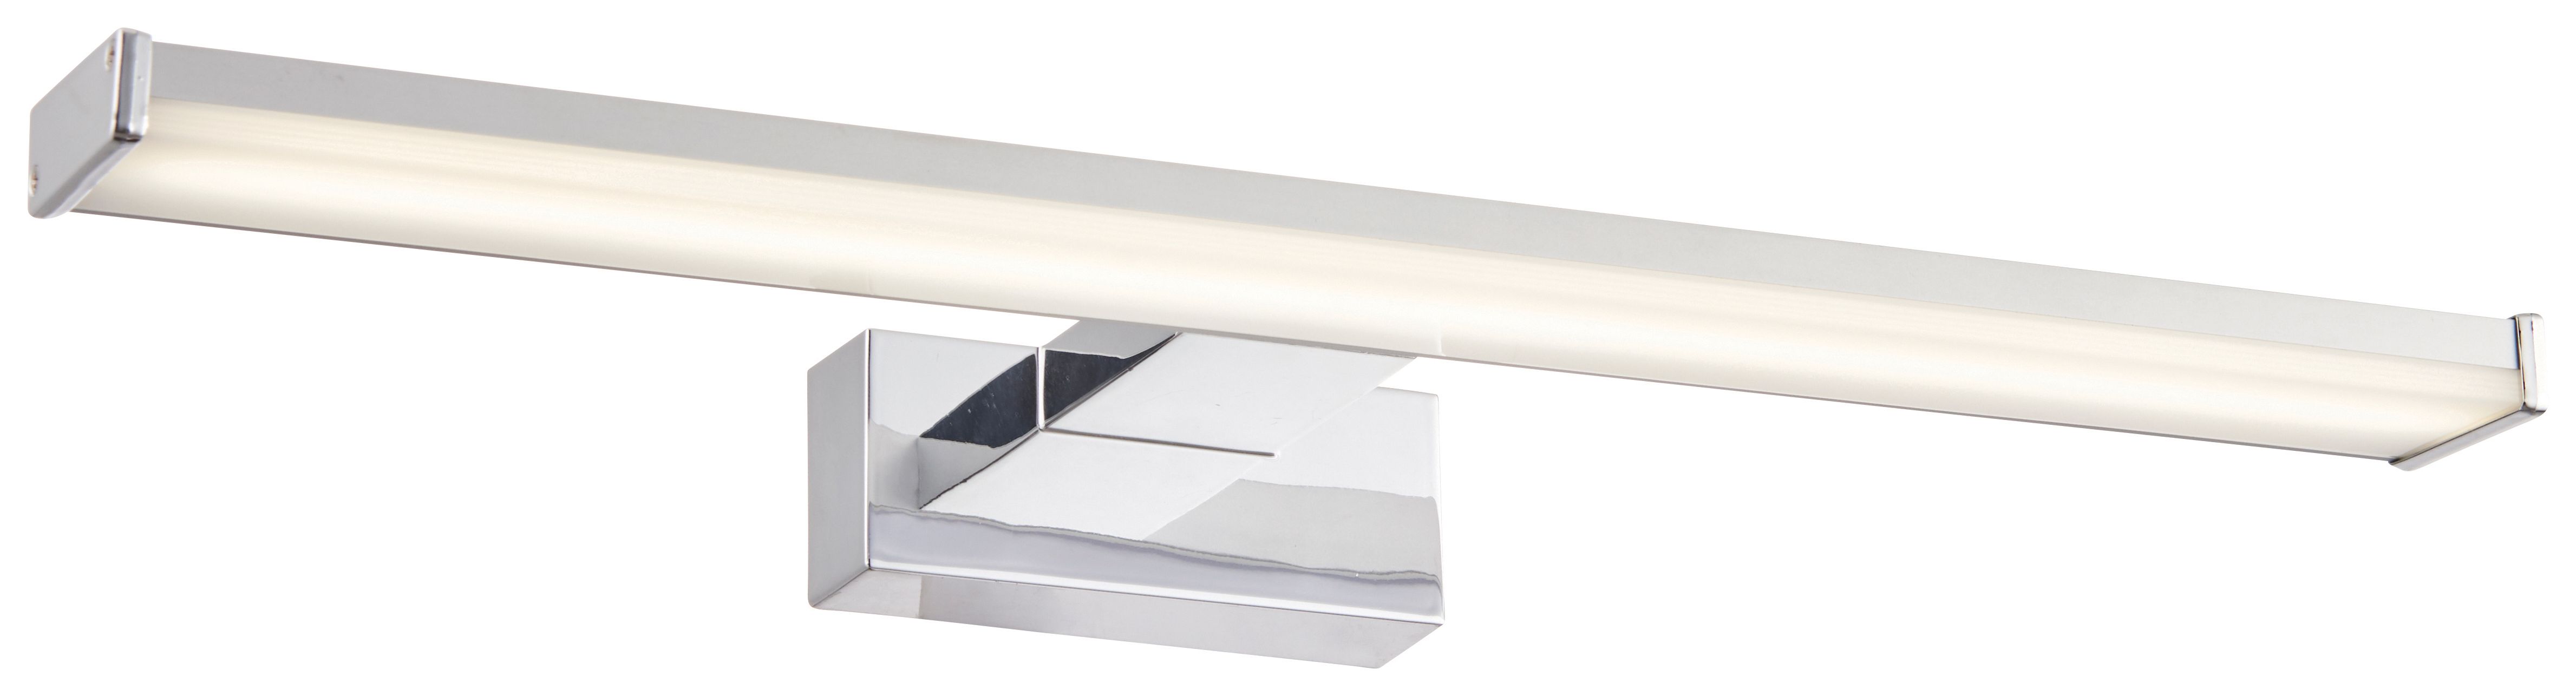 Image of Axis Shaver Mirror Wall Light